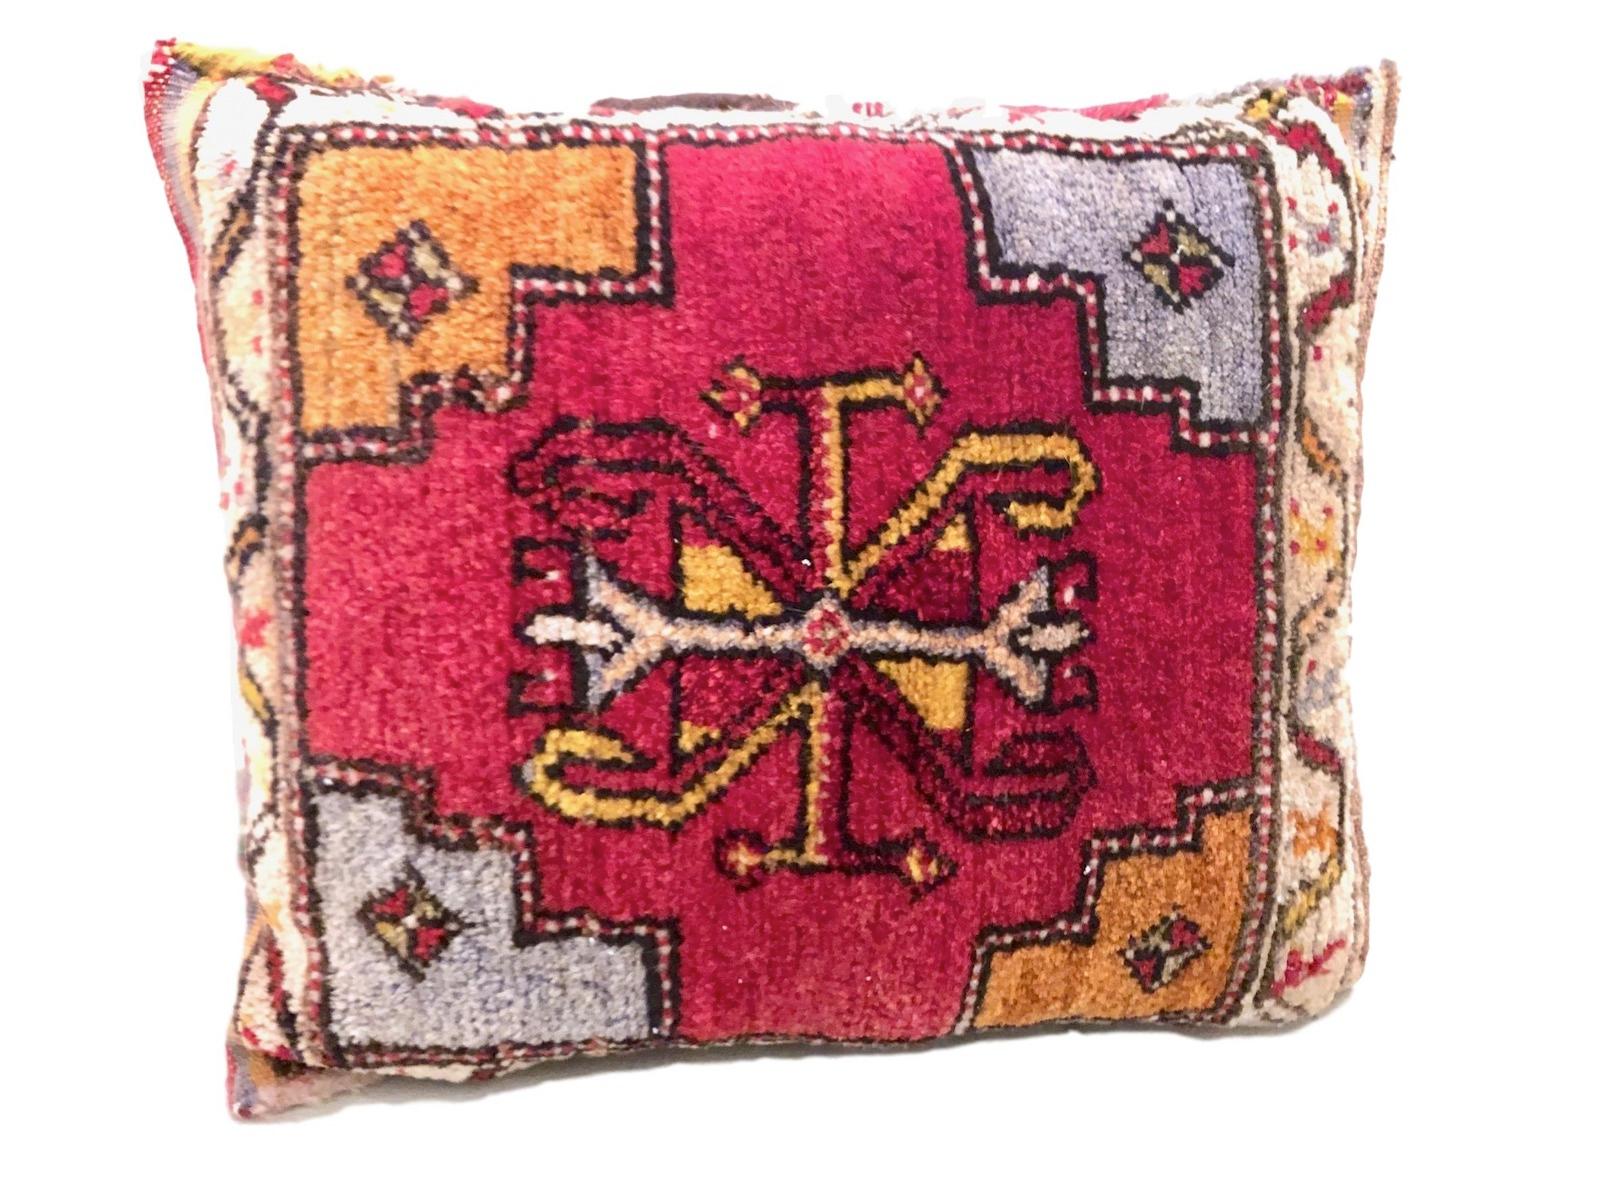 Gorgeous pair of oriental pillows. Handmade of woolen salt bags or oriental rug. Each measures approximate 16 inch high, is approximate 20 at the widest point and about 4 inch deep.